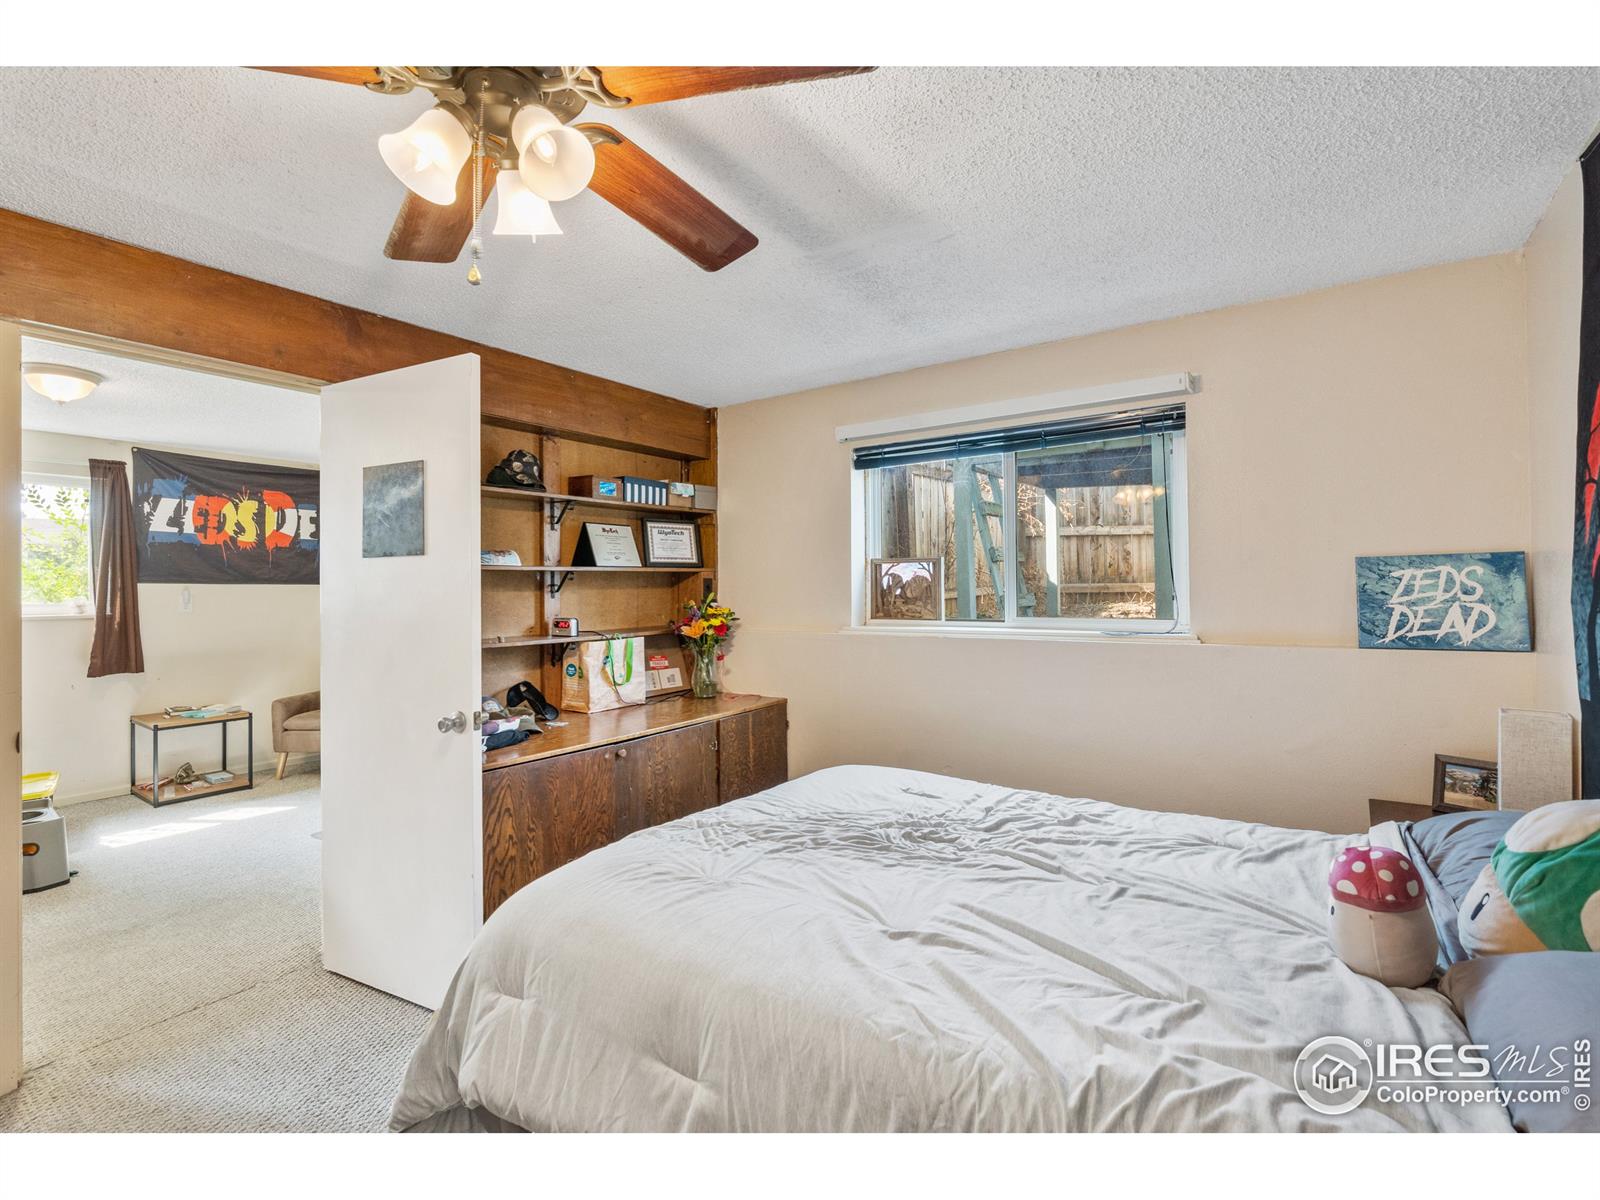 3006 Cumberland, Fort Collins, CO